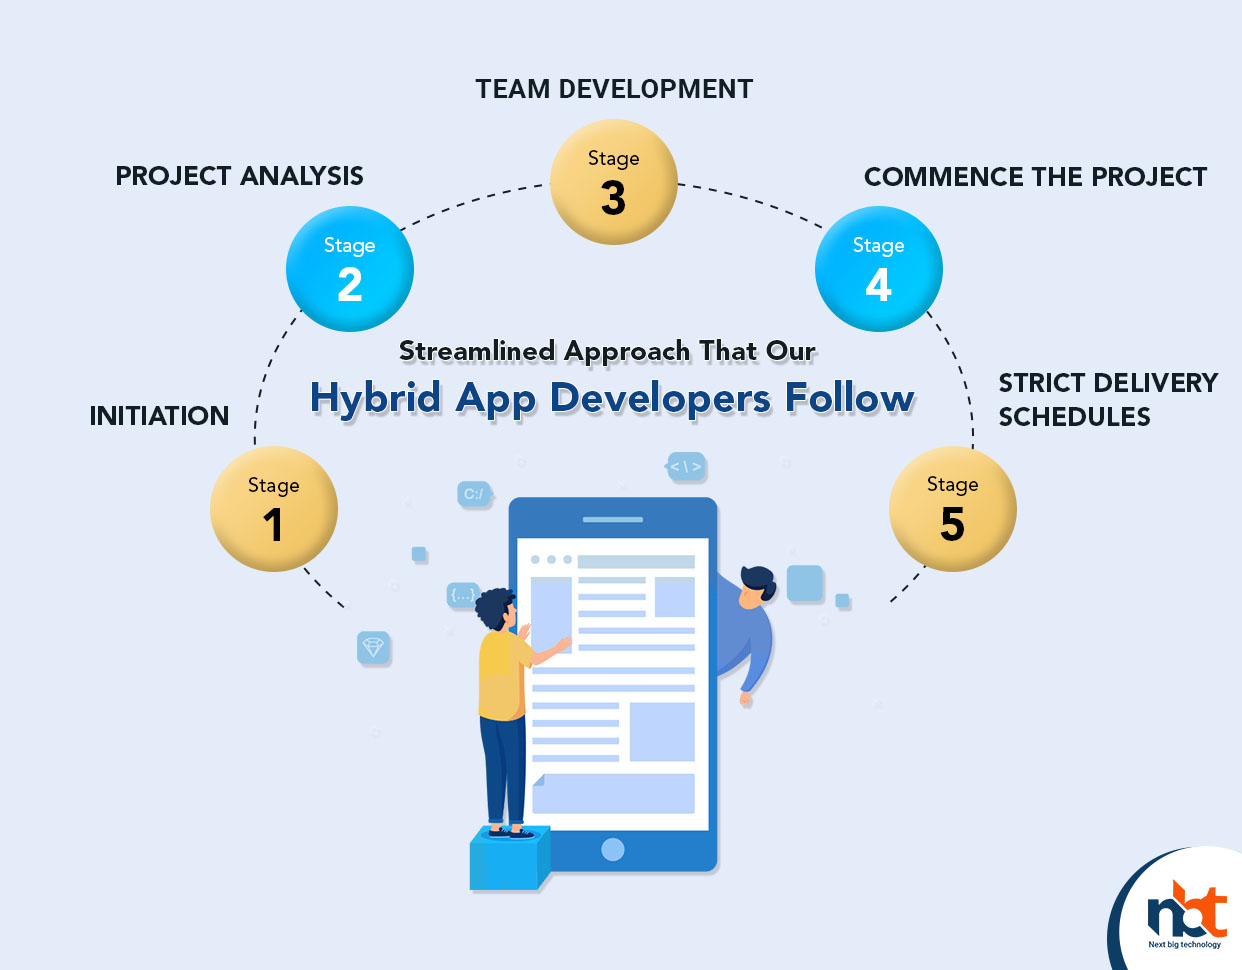 Streamlined Approach That Our Hybrid App Developers Follow